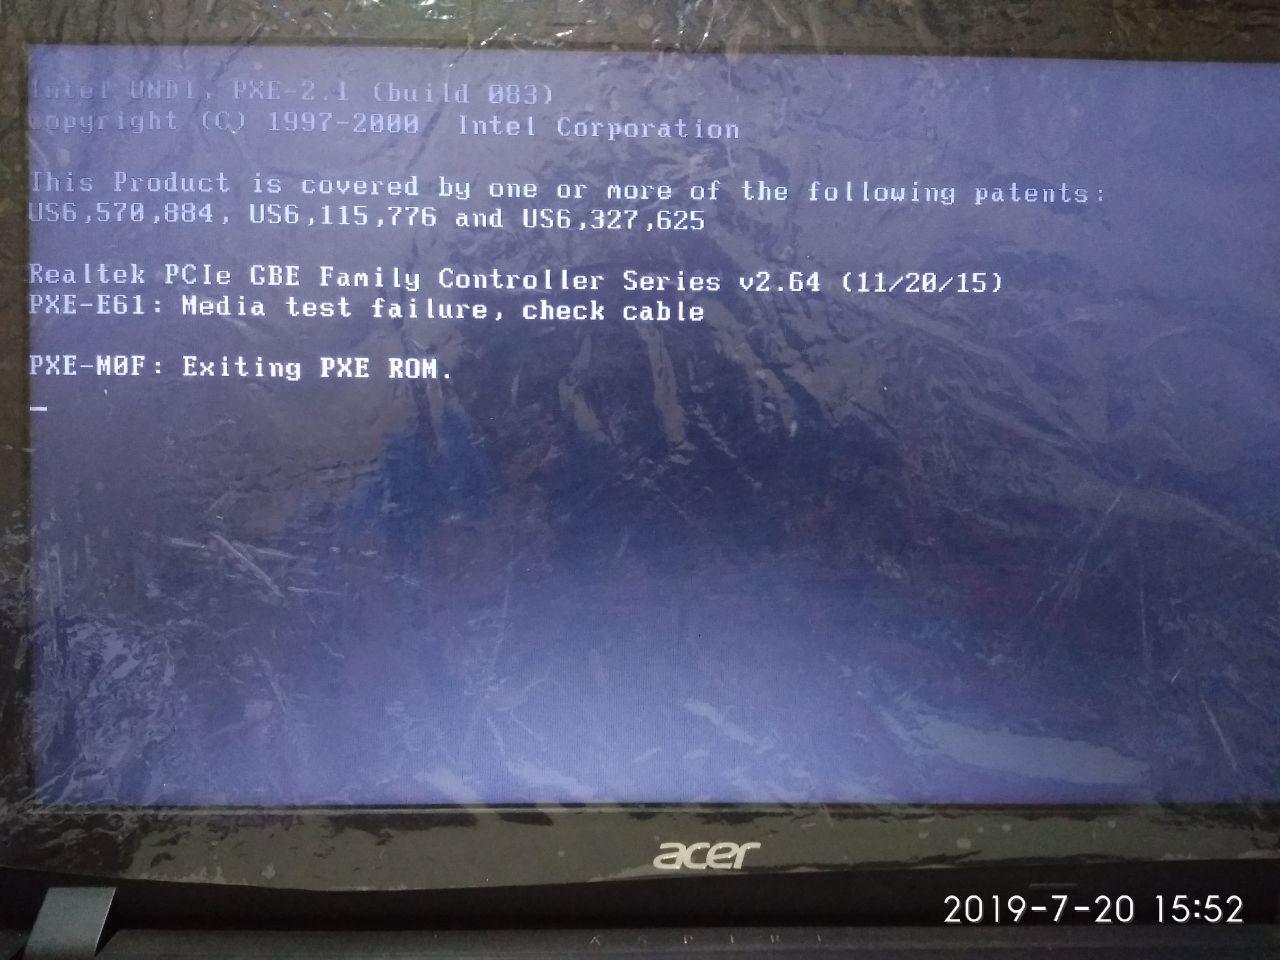 PXE E61 TEST FAILURE CHECK CABLE PXE MOF EXISTING PXE ROM - Community